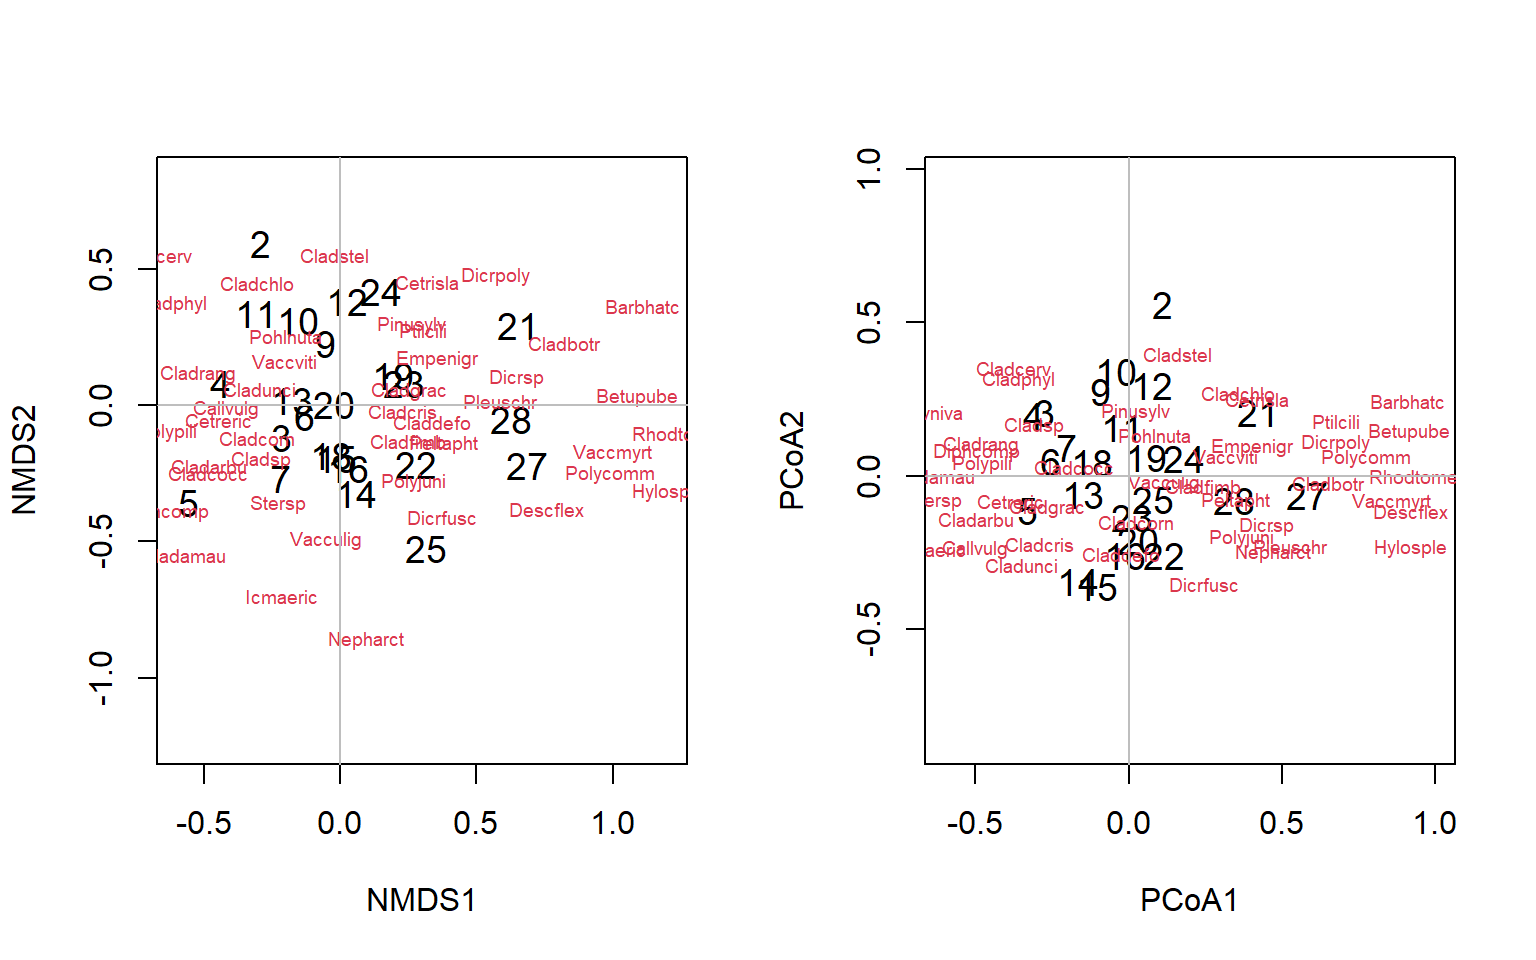 This figure shows two plots, the right plot is titled 'PCoA', has x-axis labelled 'PCoA1' and the left plot is titled 'nMDS', has x-axis labelled 'MDS1' and y-axis labelled 'MDS2'. Each plot contains 24 scattered numbers which represent the sites as well as 44 scattered species names.